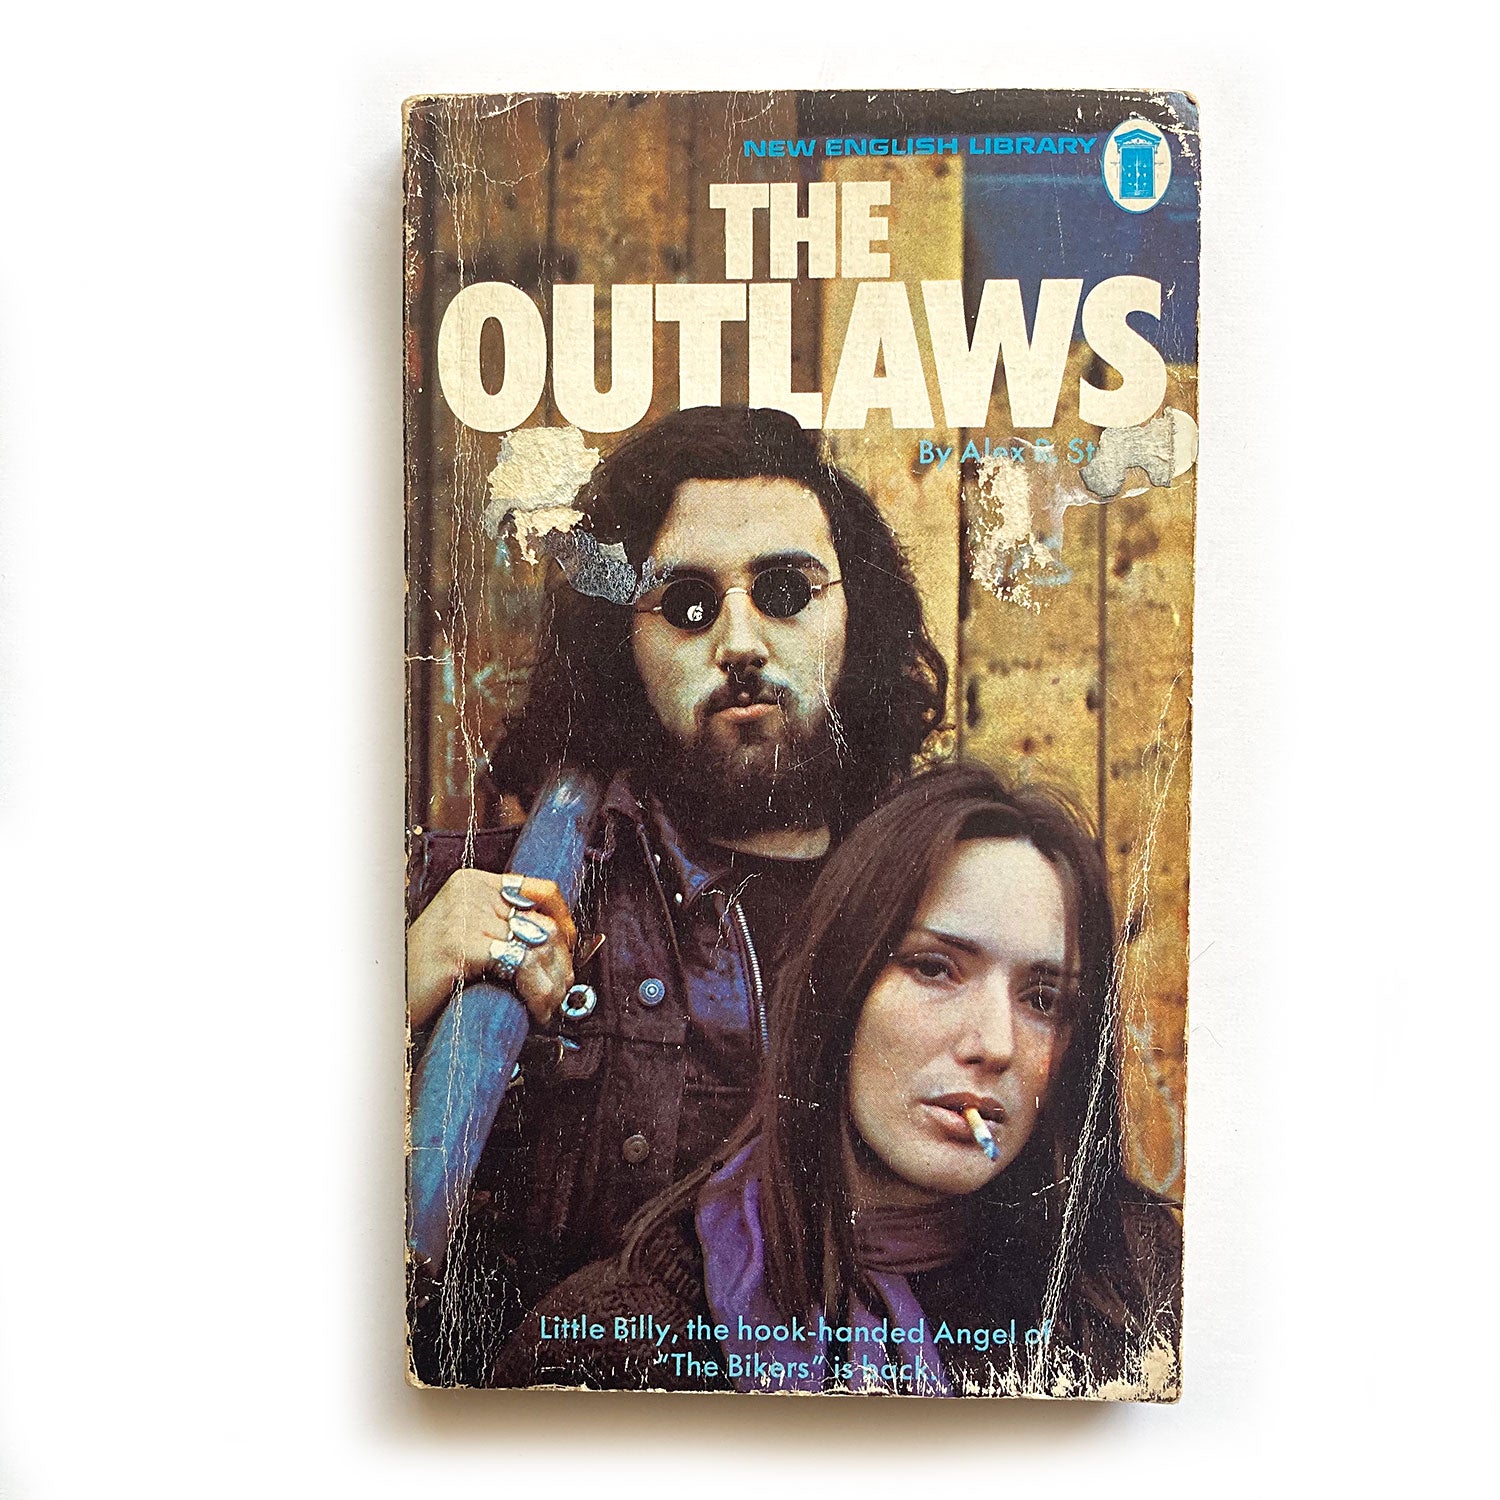 The Outlaws by Alex R. Stuart, First Edition paperback 1972, New English Library